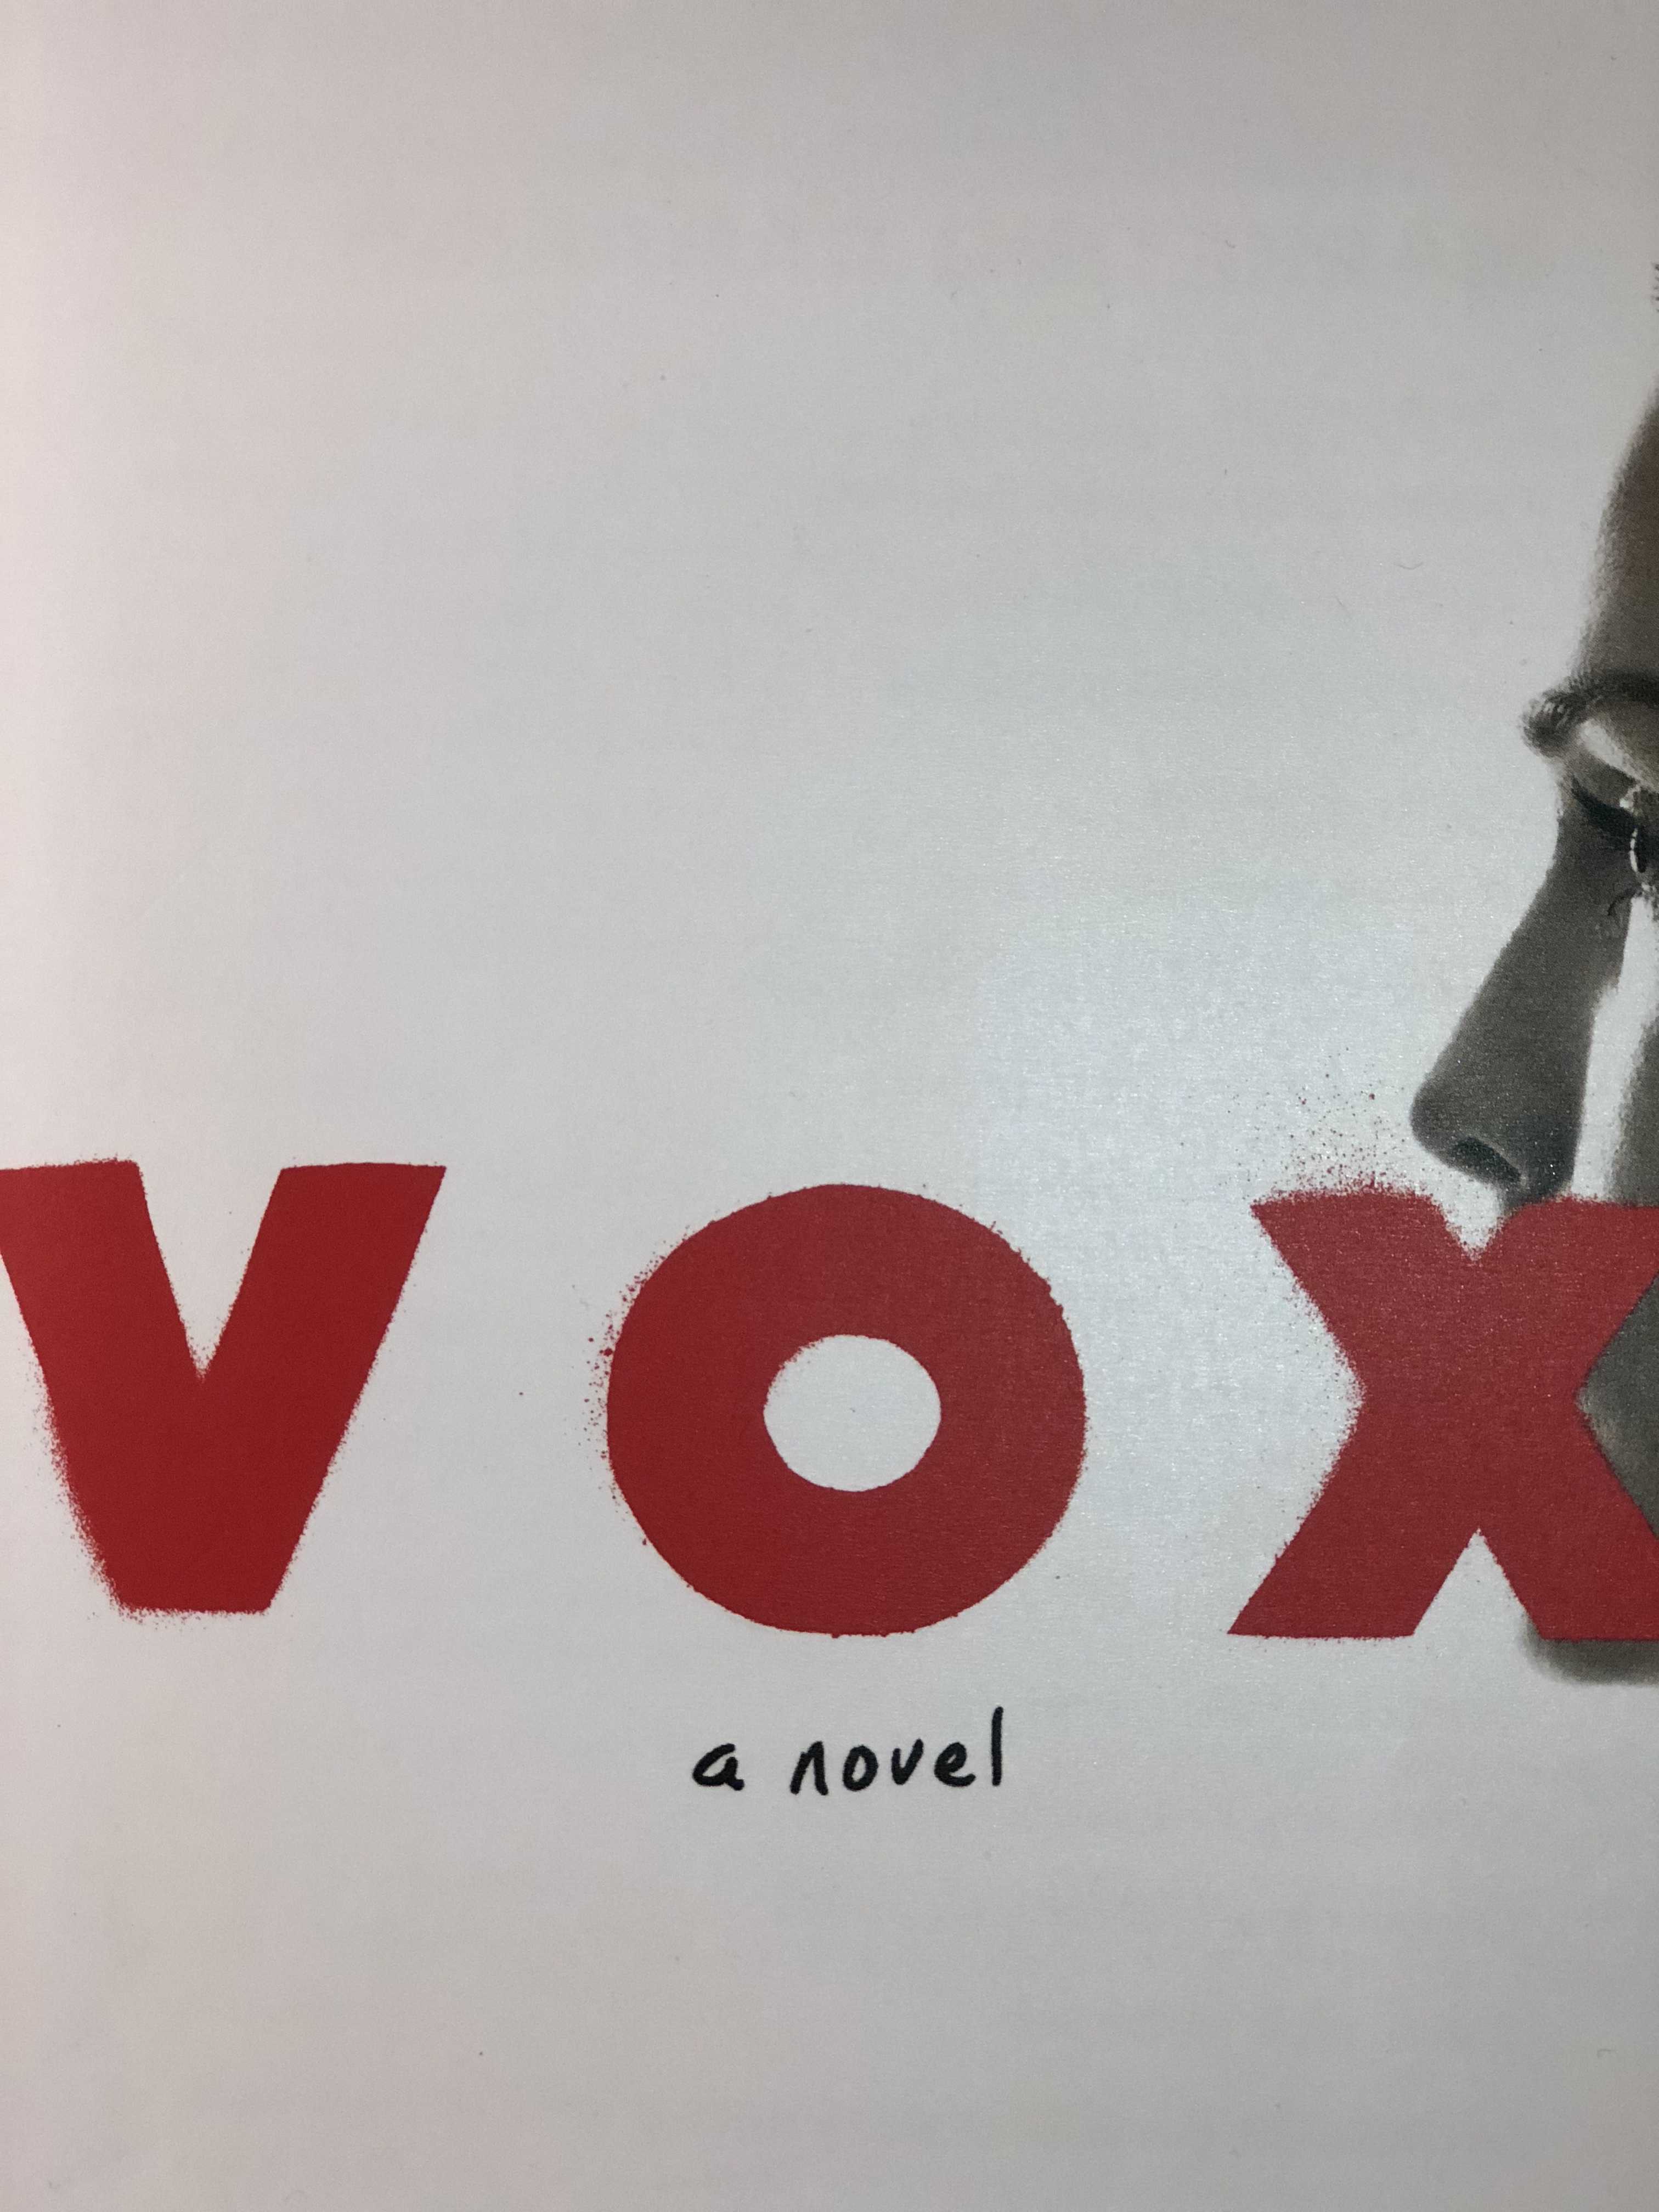 "Vox" cover, photo courtesy of Brooke Sufrin